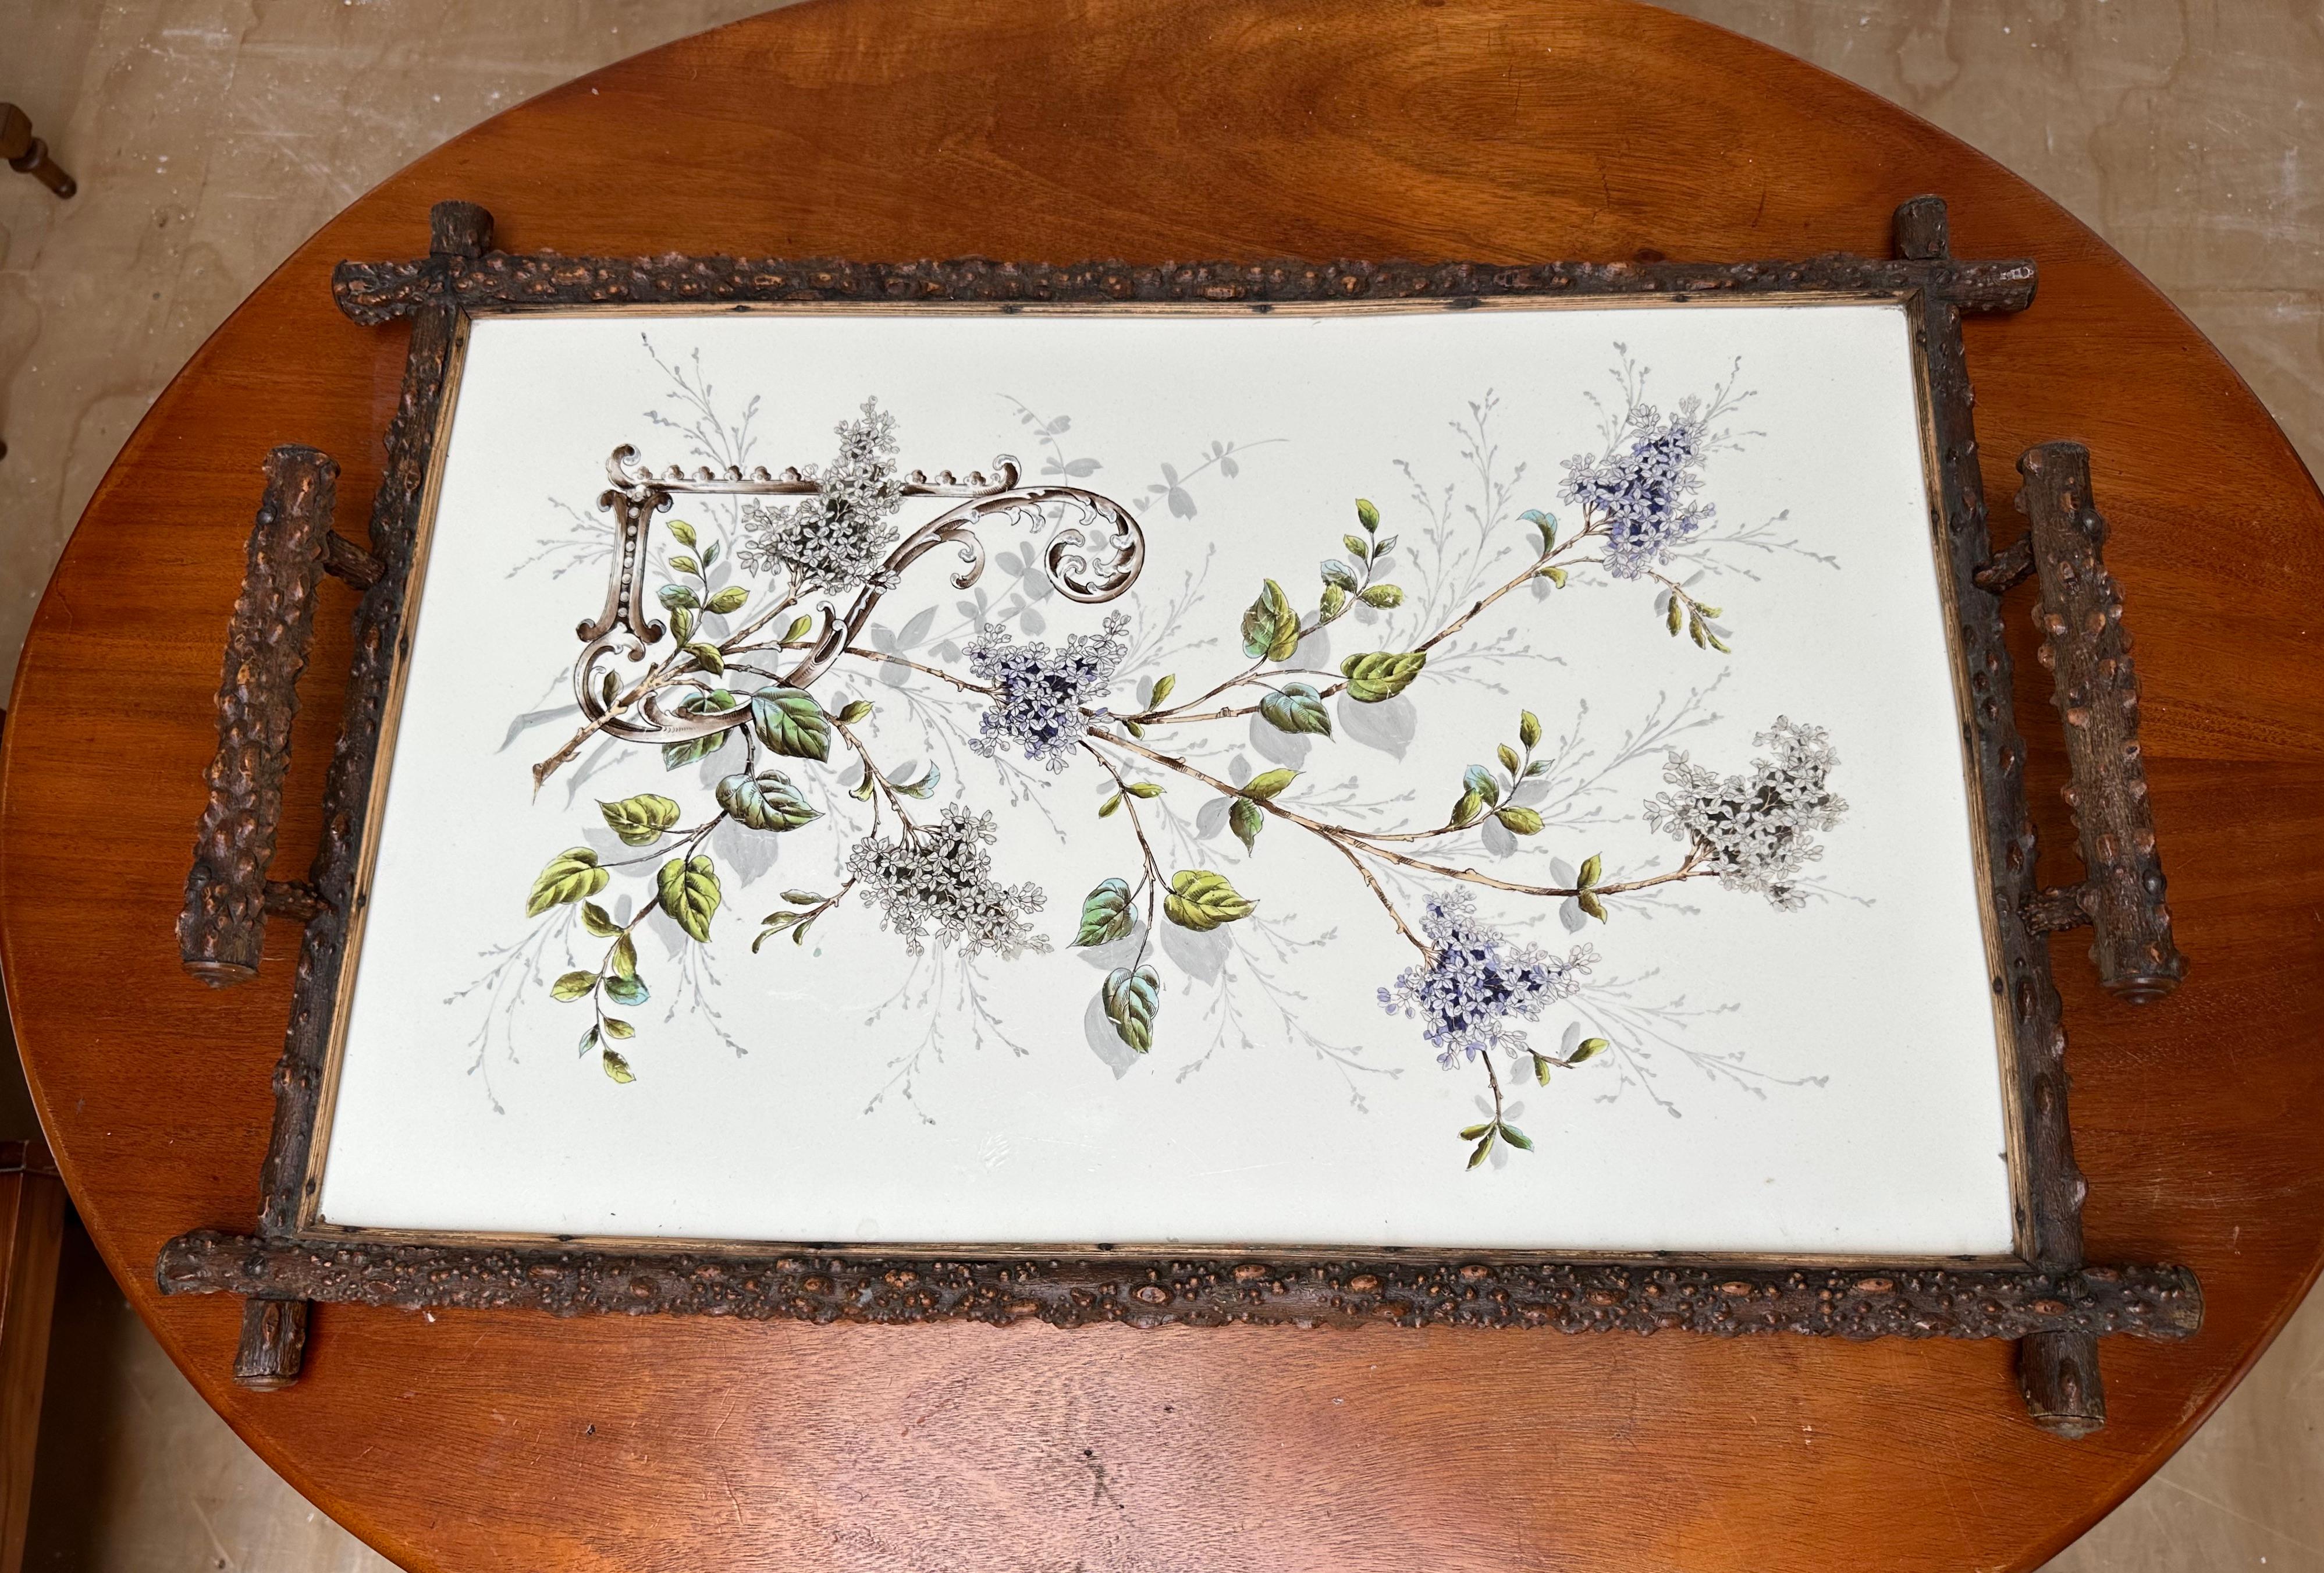 Rare and beautifully hand painted and glazed, porcelain tile in superb branches frame serving tray.

This beautiful quality and marvelous design tile serving tray is another one of our recent great finds and an absolute joy to own and to look at. It